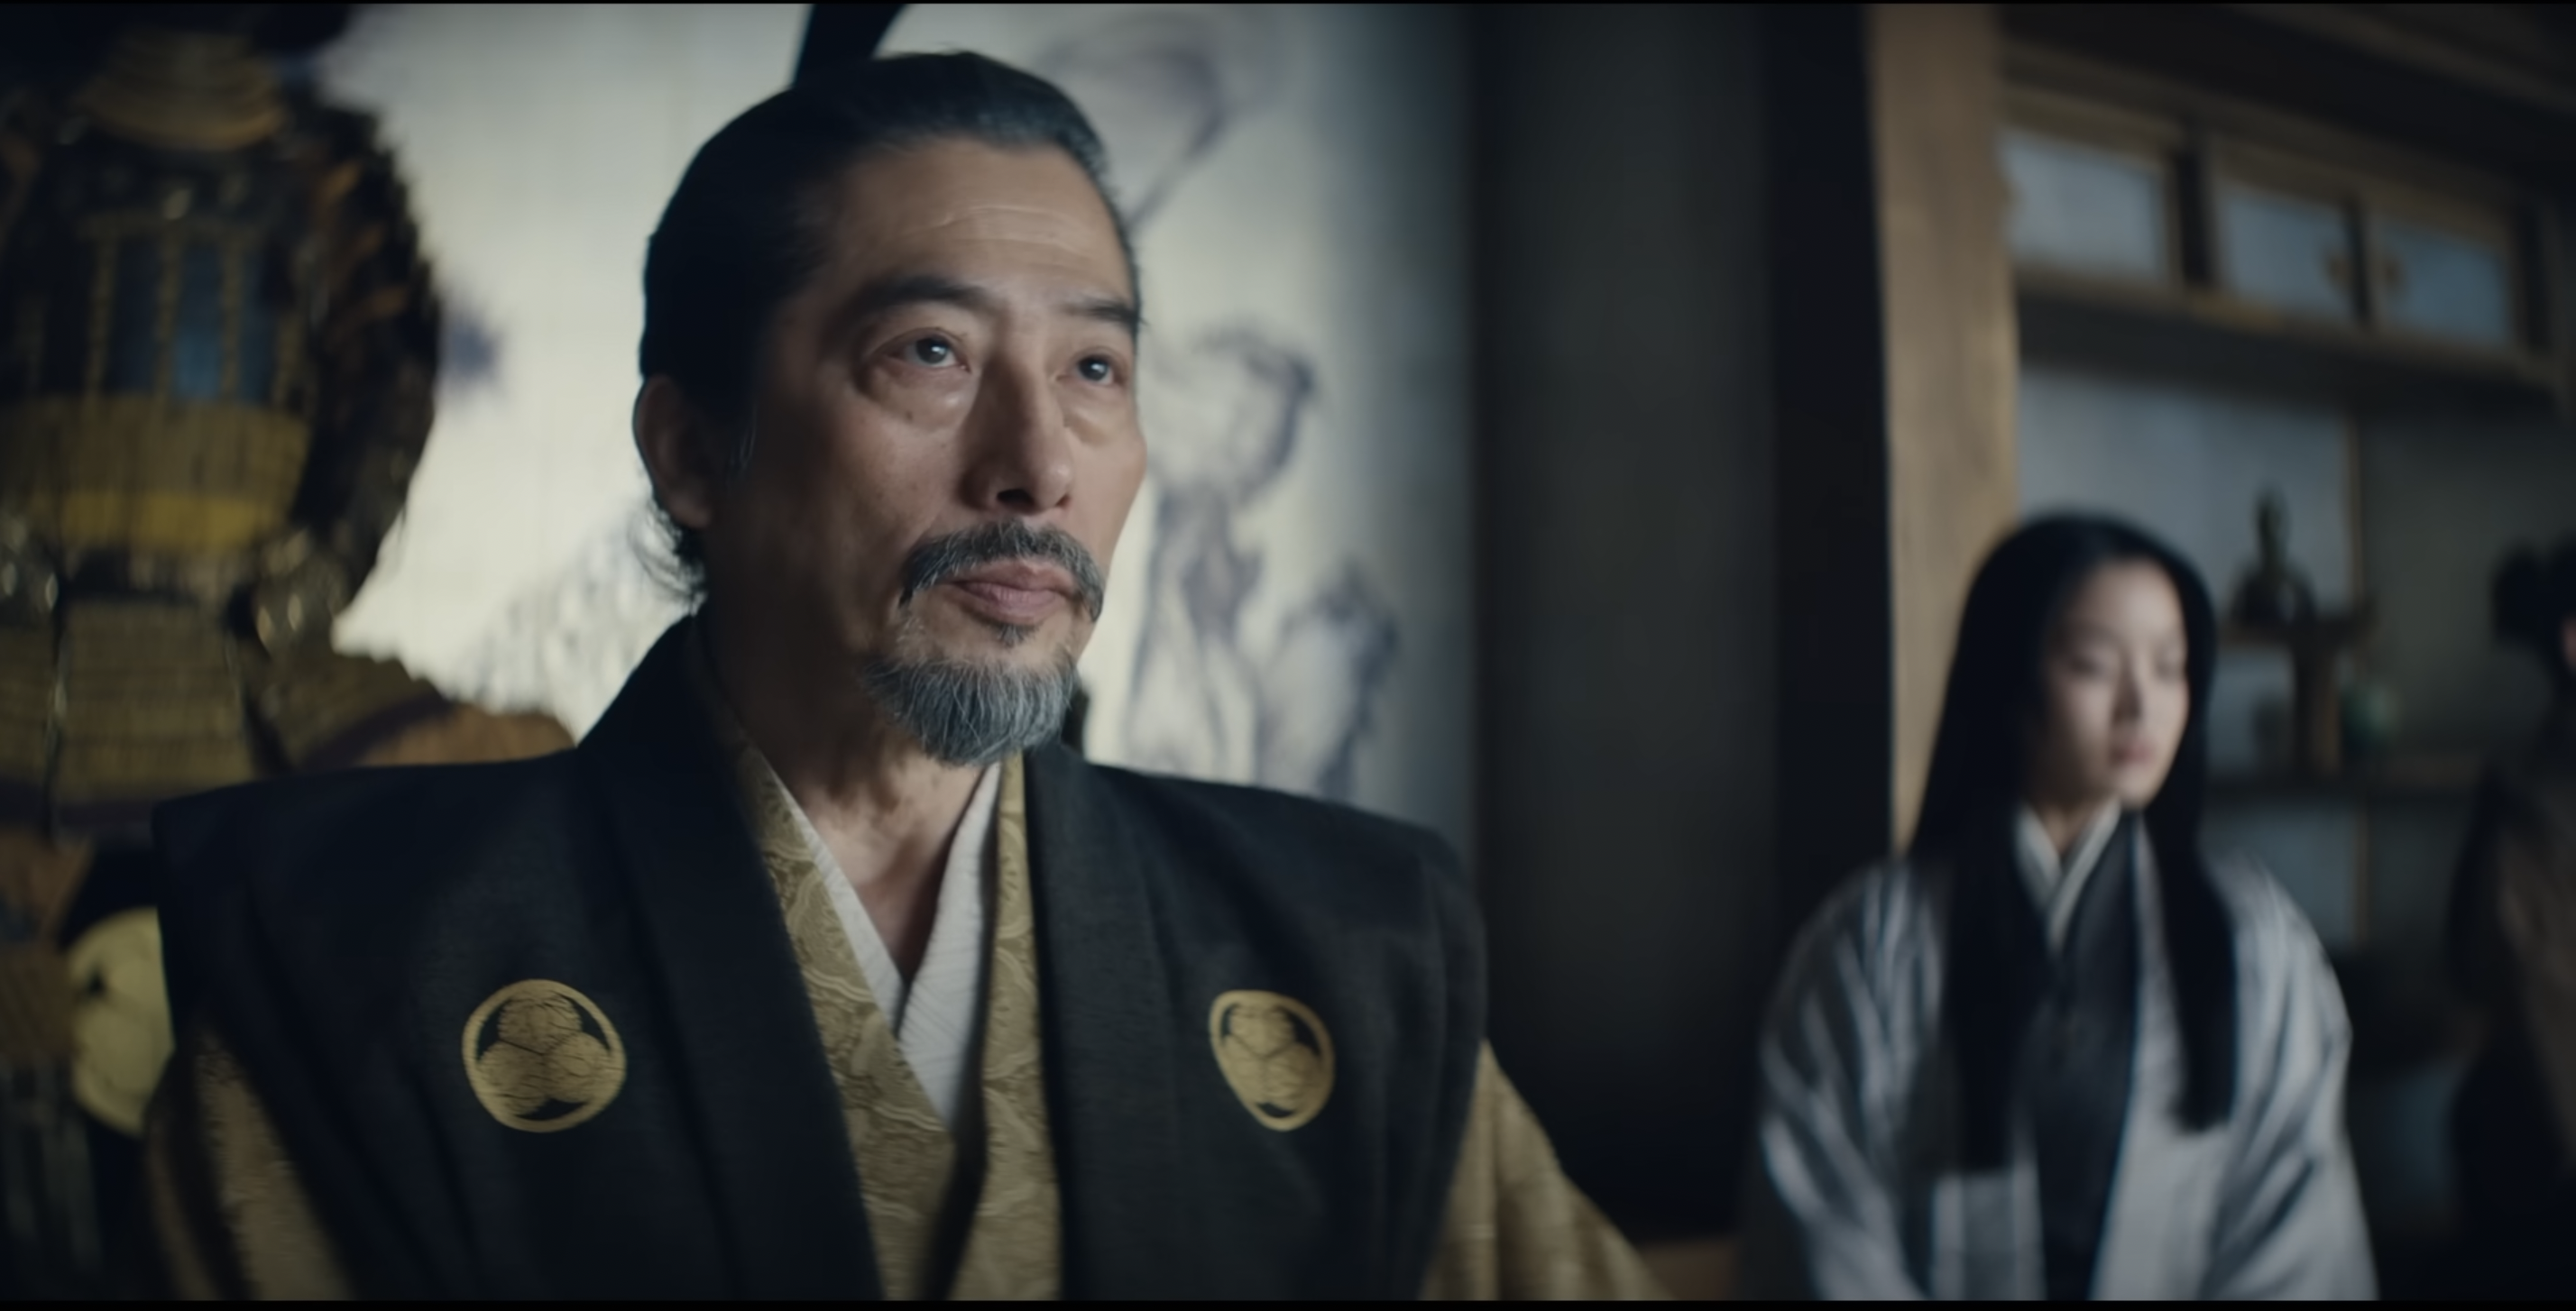 New Samurai show with John Wick star compared to Game of Thrones with 100% on Rotten Tomatoes